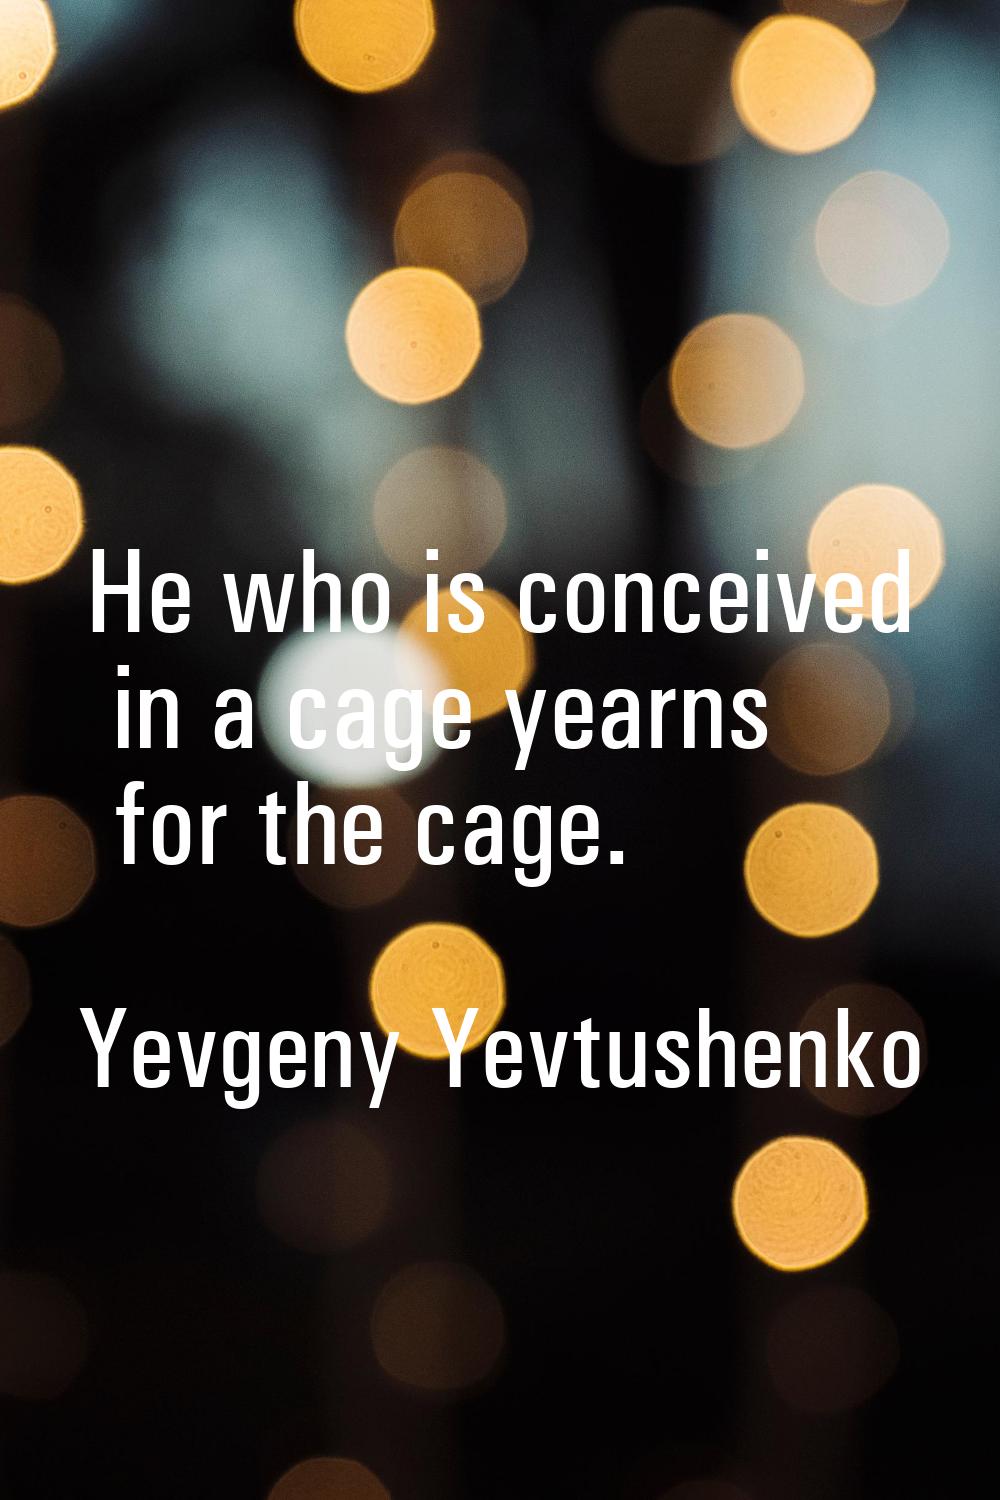 He who is conceived in a cage yearns for the cage.